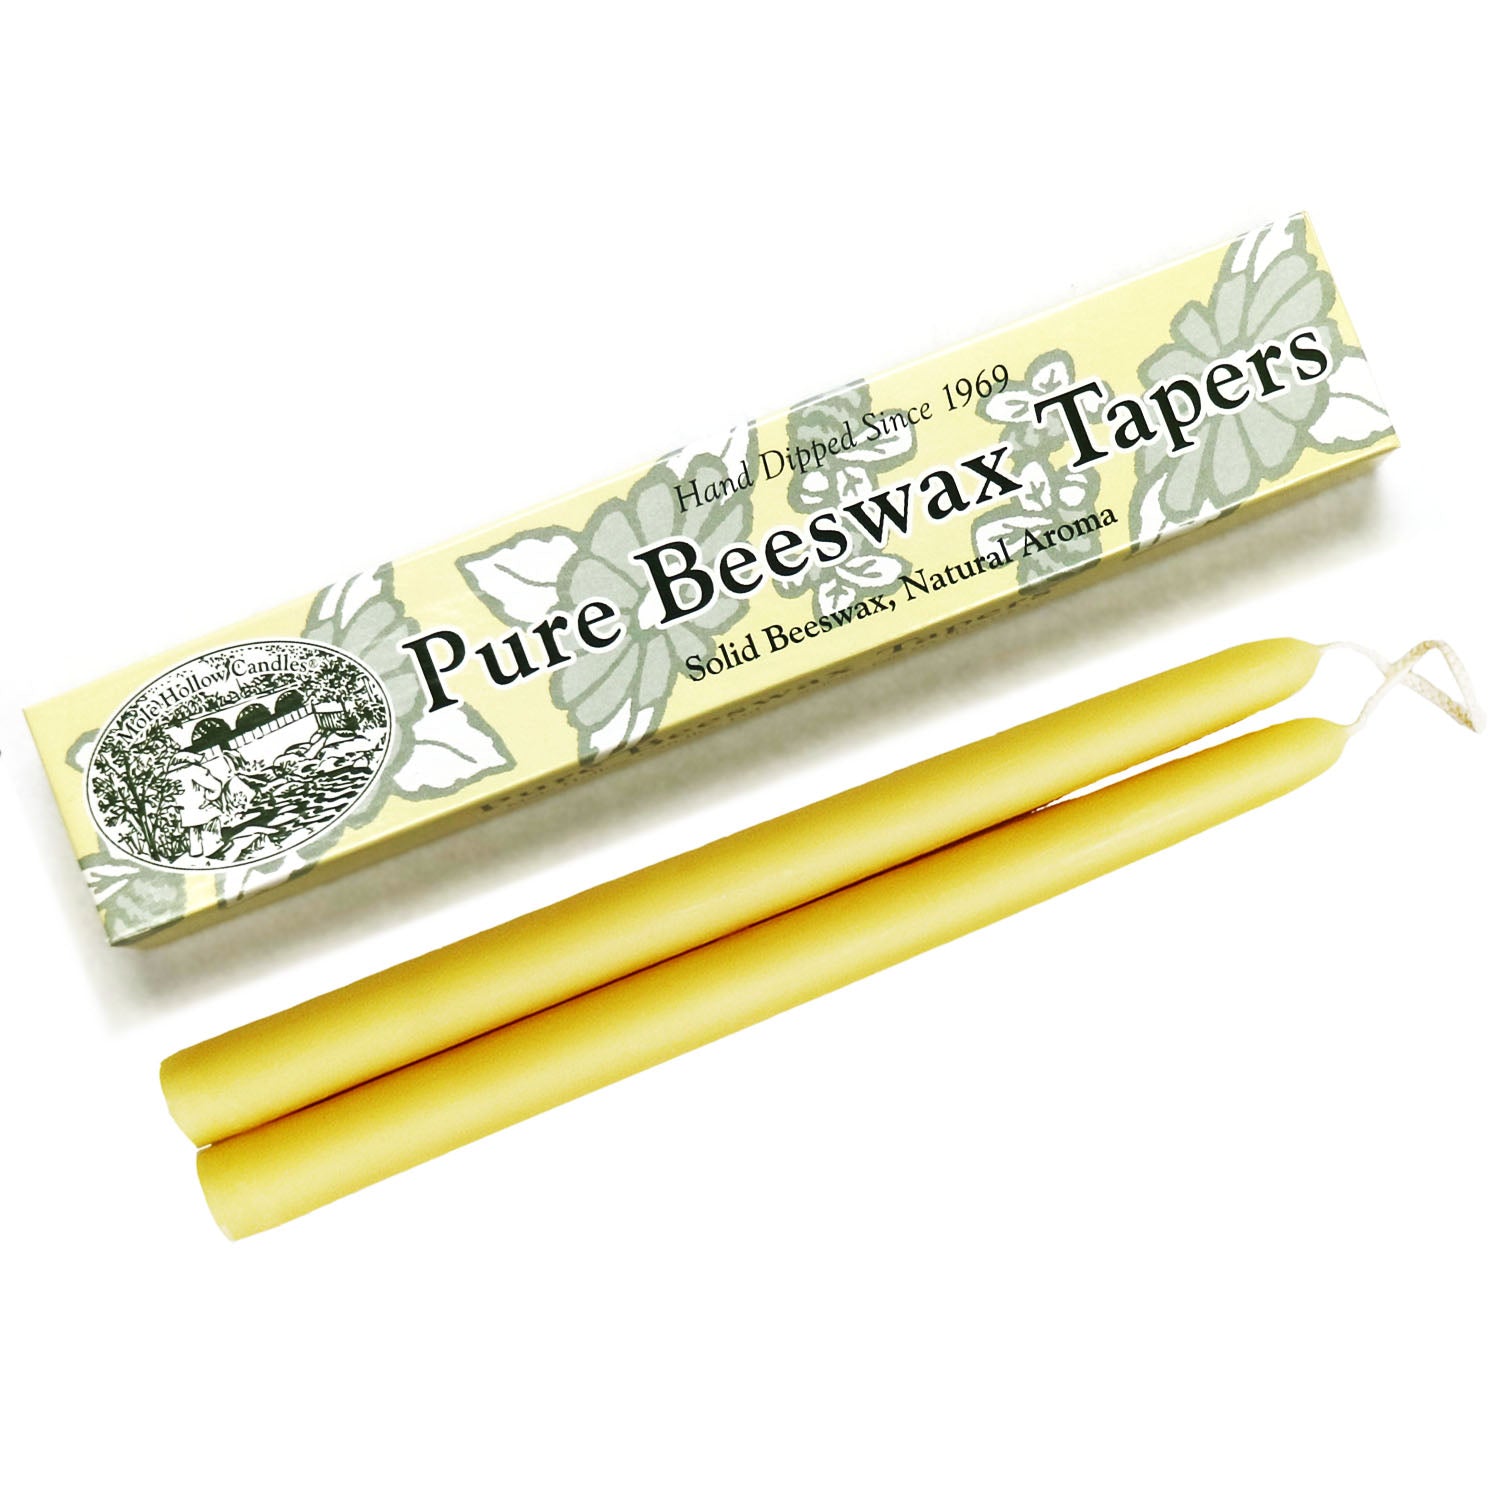 10" Beeswax Tapers Gift Box - Unscented Beeswax Candles - Mole Hollow Candles